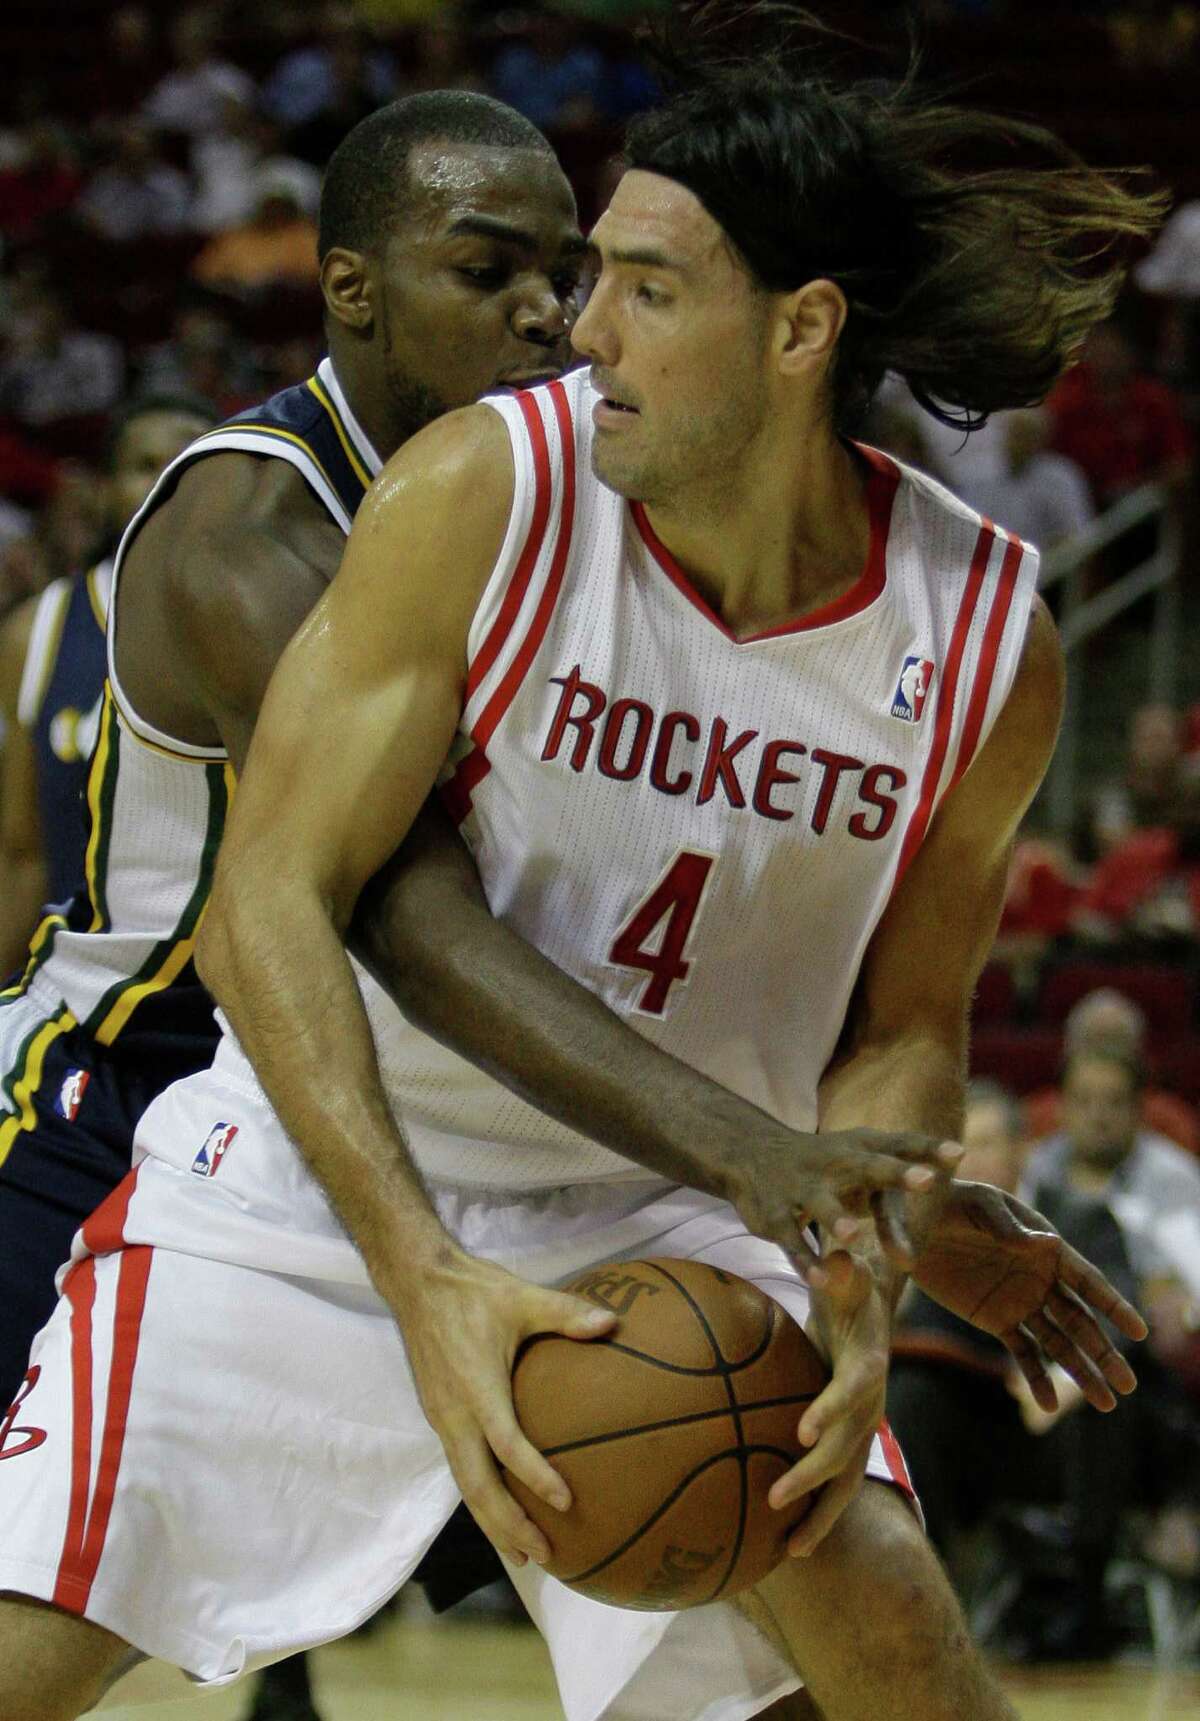 Utah Jazz's Paul Millsap, left, and Houston Rockets' Luis Scola, right, tangle over ball during the first quarter of NBA game at Toyota Center Wednesday, April 11, 2012, in Houston.